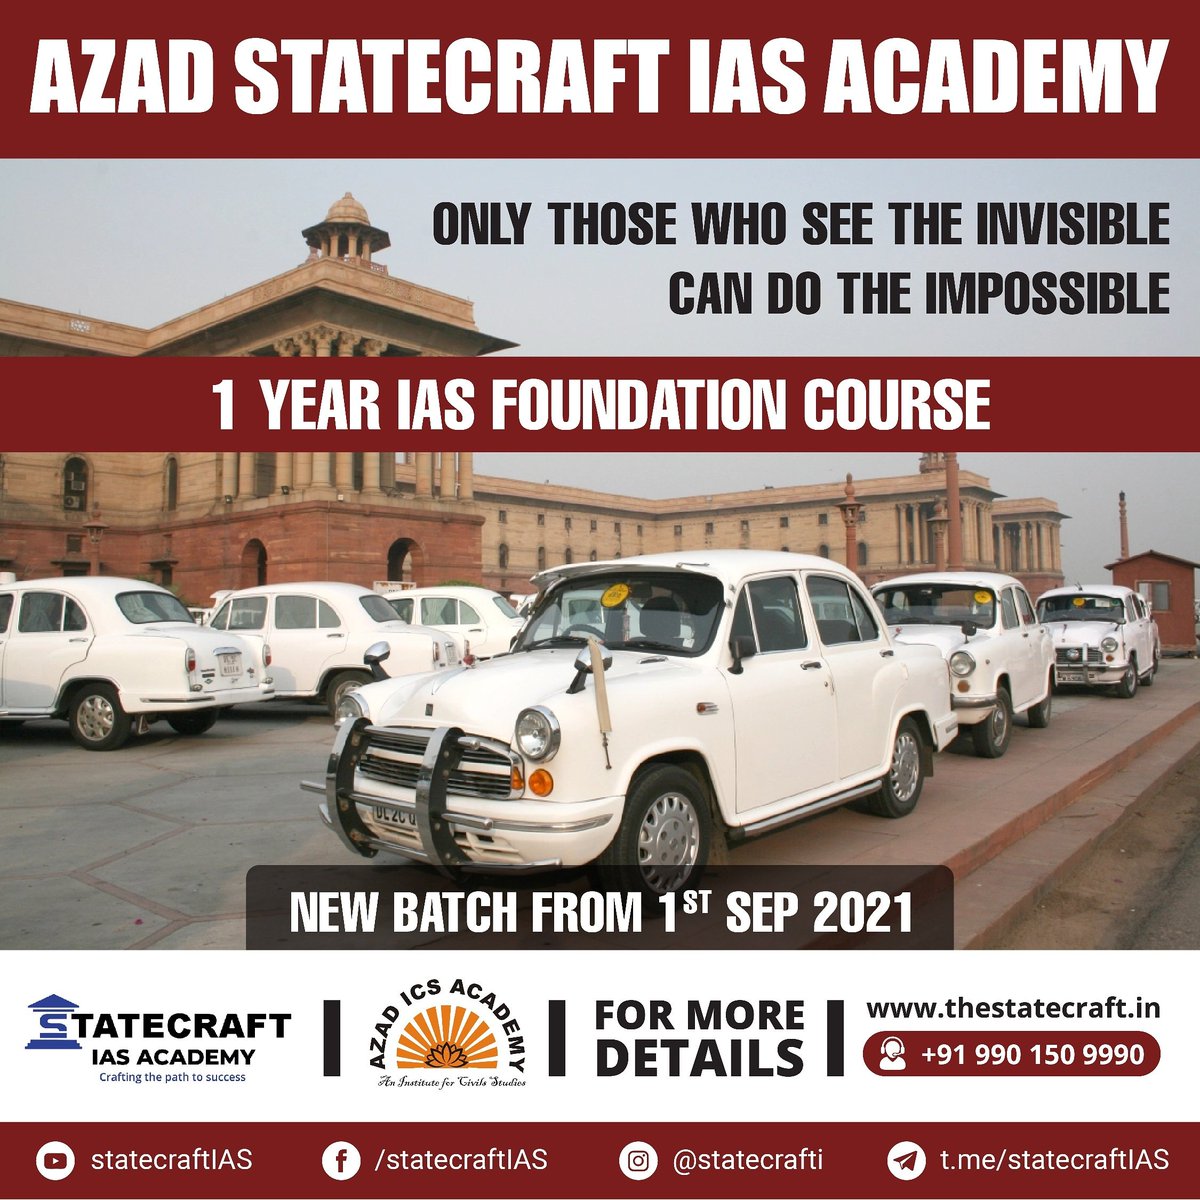 Only those who see the INVISIBLE
Can do the IMPOSSIBLE!!

Foundation course IAS/KAS @ Azad Statecraft IAS Academy

For more details call us at 9901509990

Or visit thestatecraft.in

#IAS #KAS #civilservices #Prelims #upscmotivation #IASaspirants #StatecraftIAS